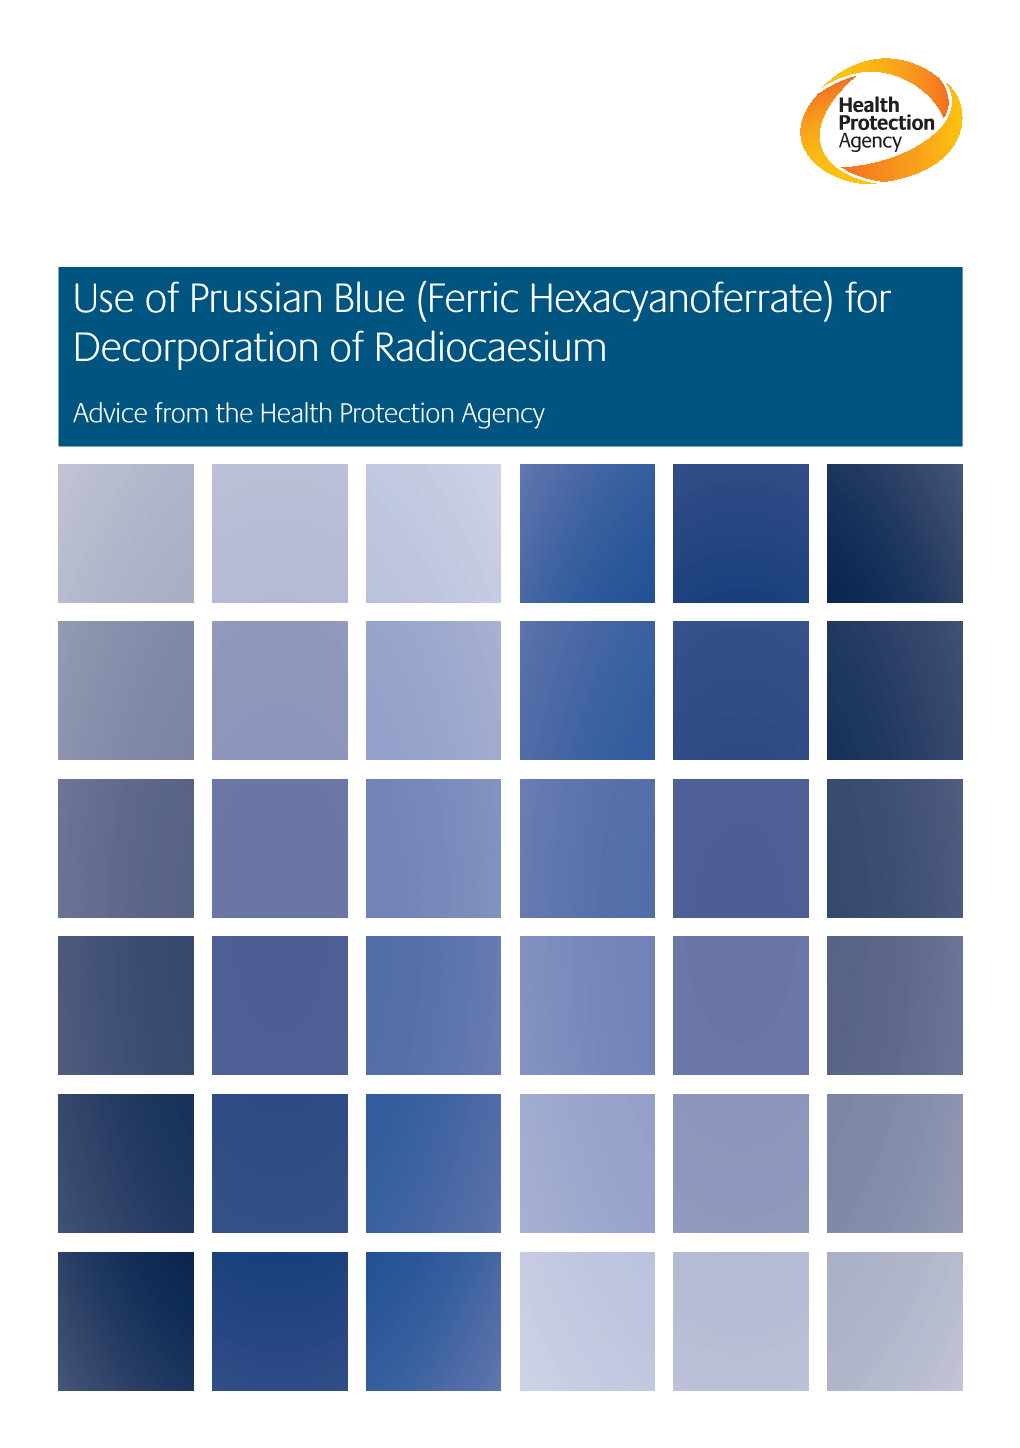 RCE-17 Use of Prussian Blue for Decorporation of Radiocaesium